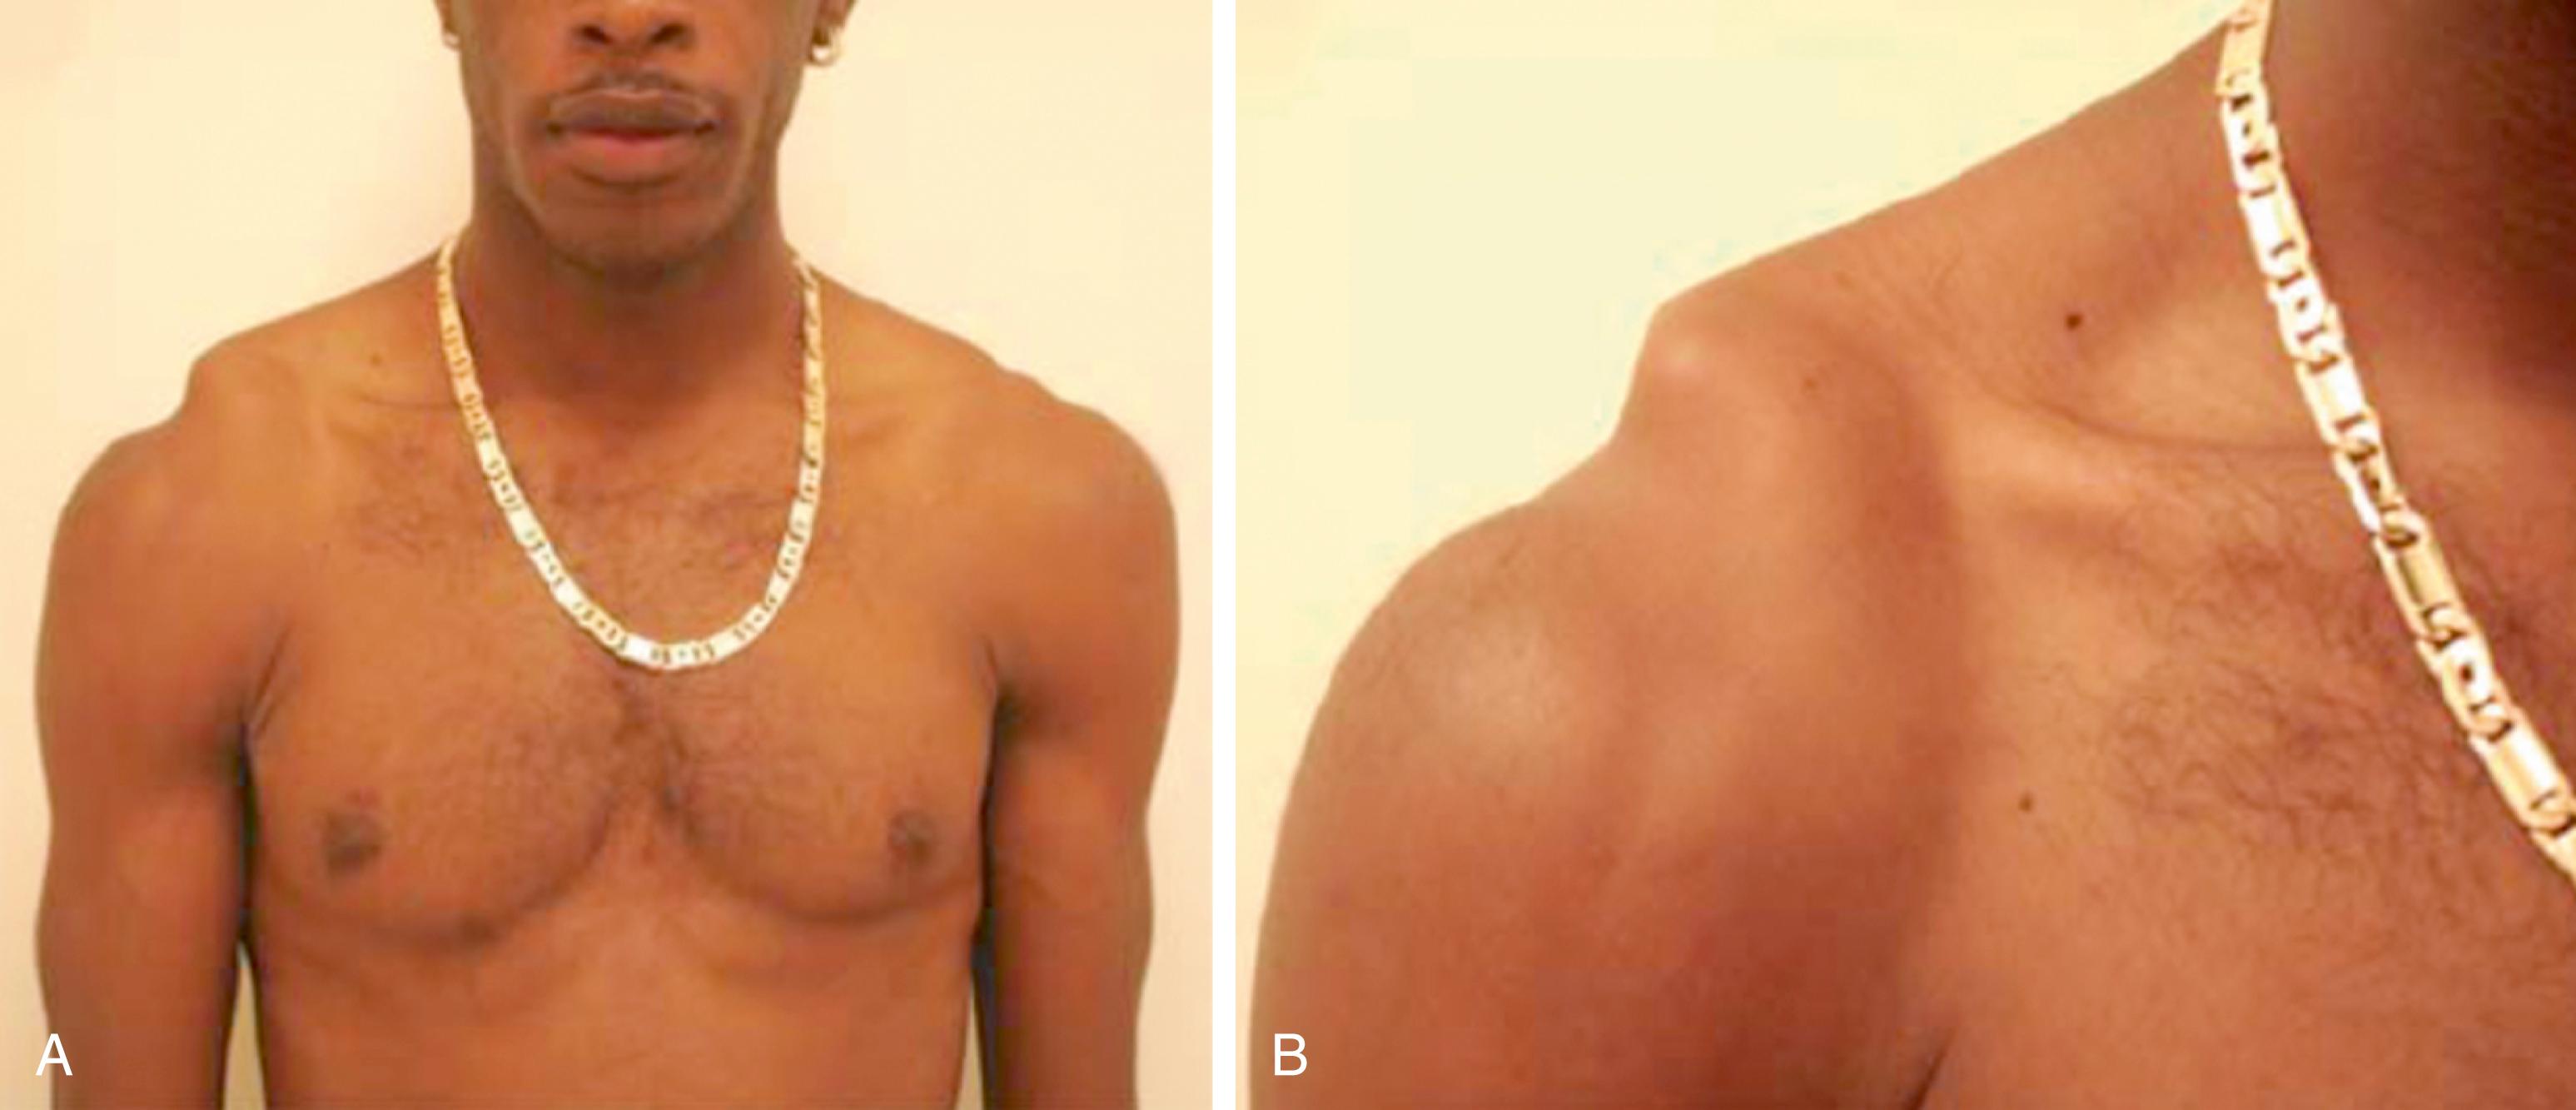 Fig. 12.4, Clinical photographs of a patient presenting with a Rockwood Type V acromioclavicular joint injury.